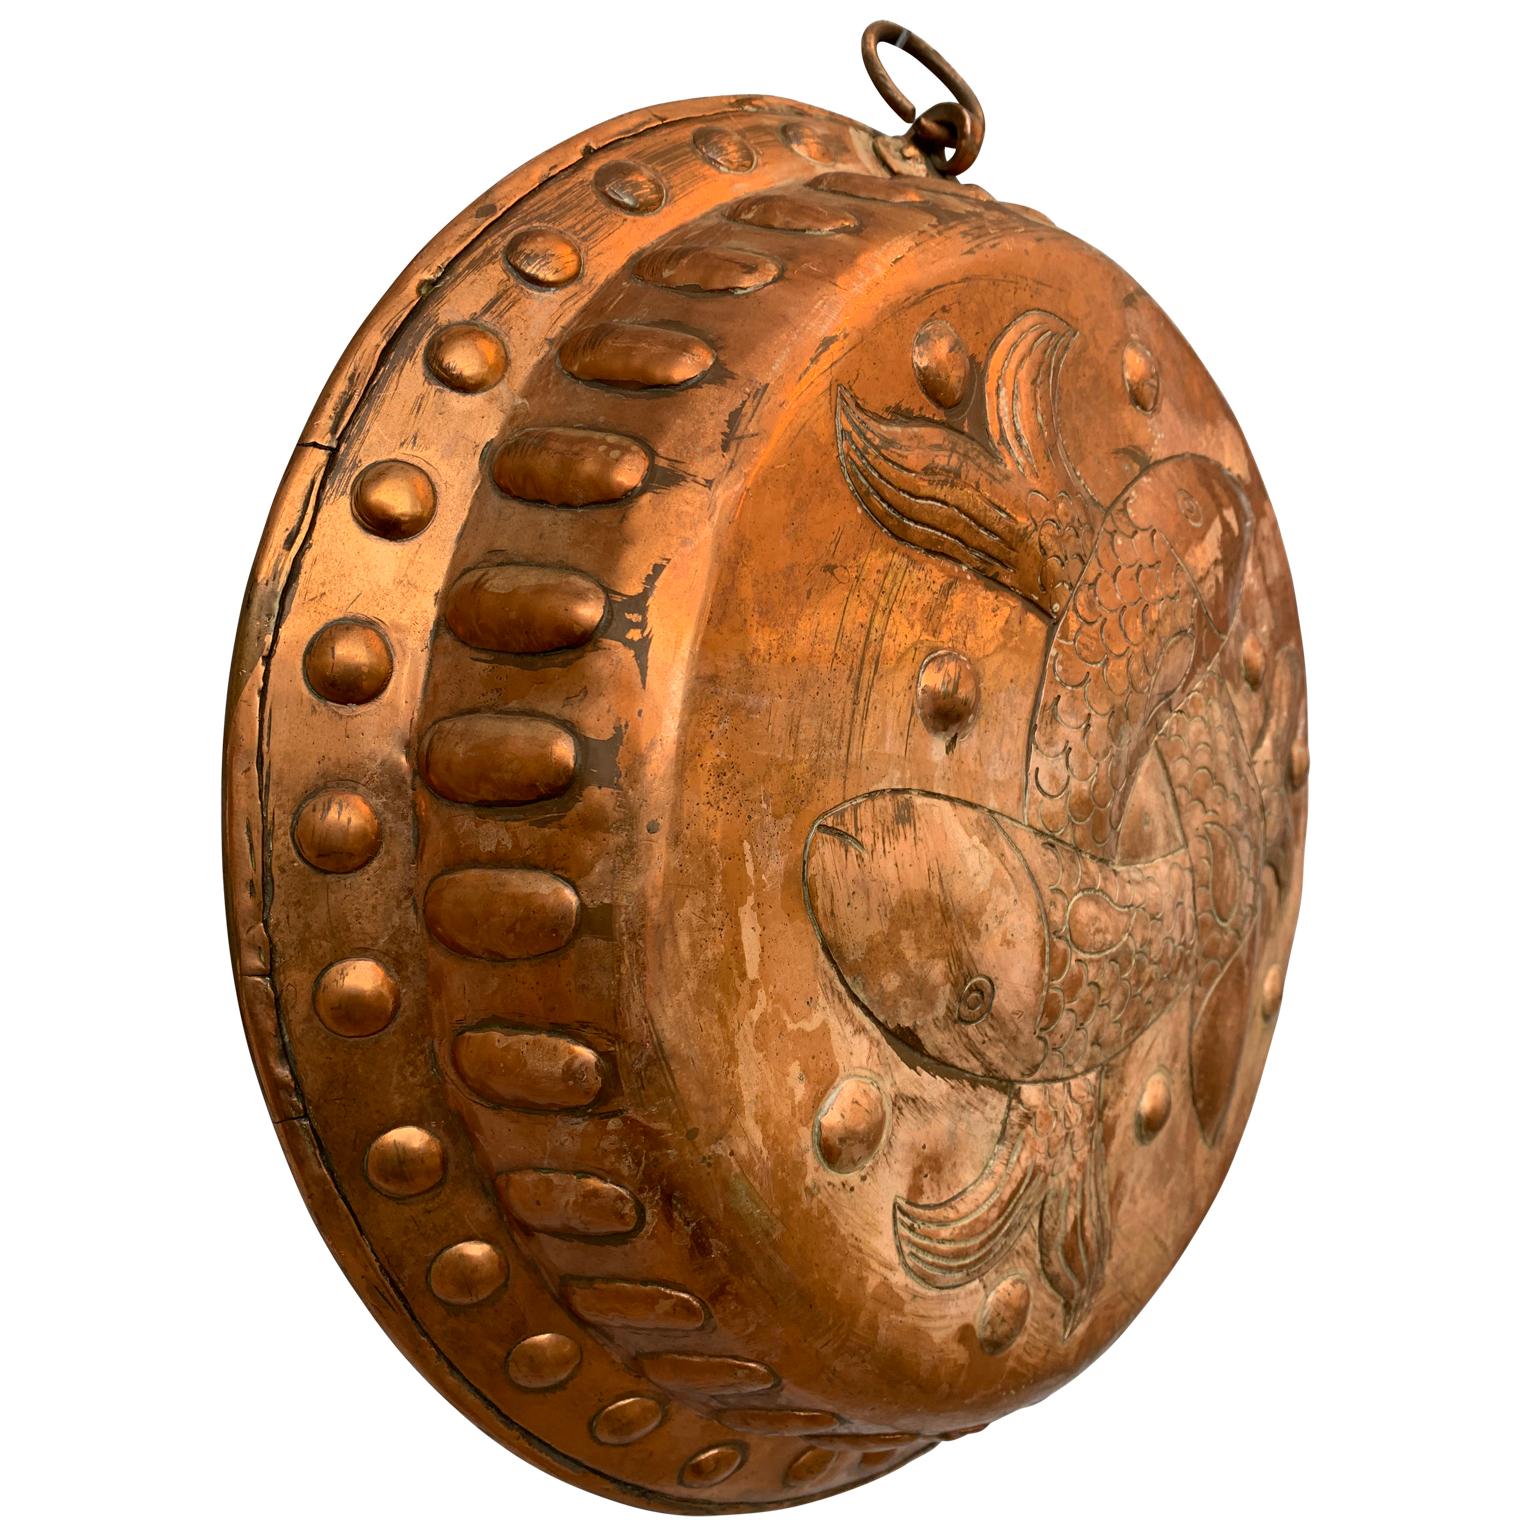 Danish 19th century copper bread mold with fishes motif.